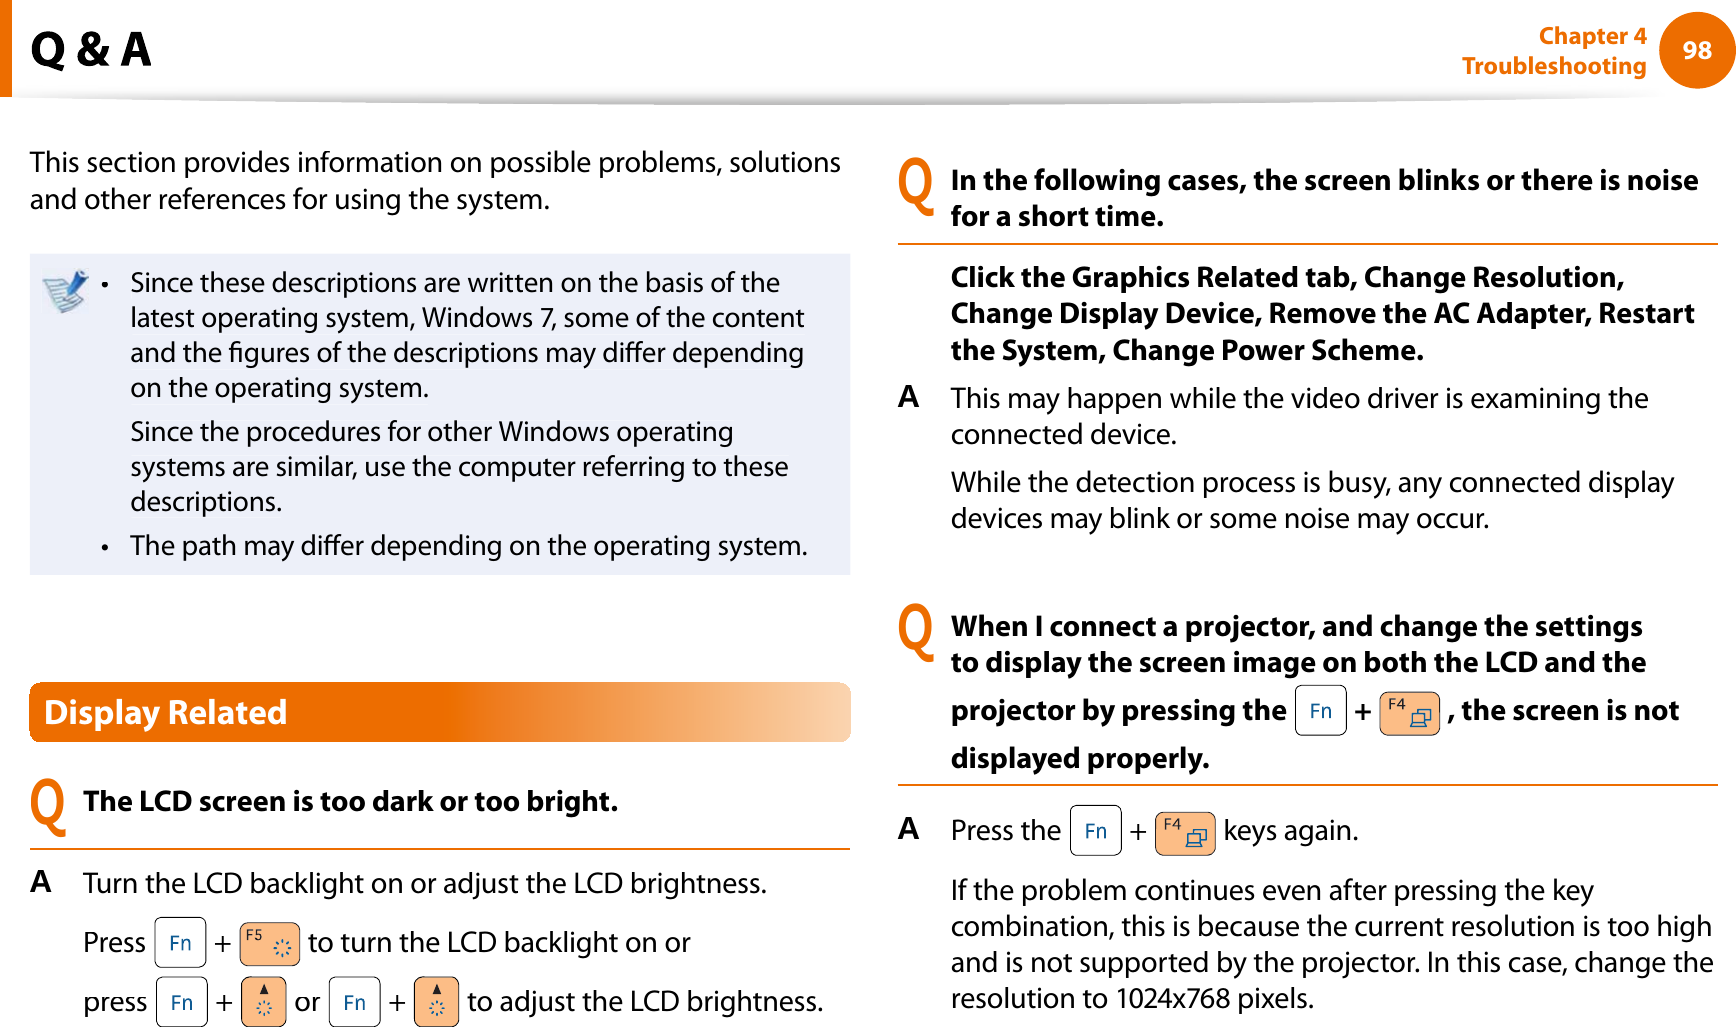 98Chapter 4TroubleshootingThis section provides information on possible problems, solutionsand other references for using the system.Since these descriptions are written on the basis of thetlatest operating system, Windows 7, some of the contentand the gures of the descriptions may dier dependingon the operating system.Since the procedures for other Windows operatingsystems are similar, use the computer referring to thesedescriptions.The path may dier depending on the operating system.tDisplay RelatedQThe LCD screen is too dark or too bright.ATurn the LCD backlight on or adjust the LCD brightness.Press  + to turn the LCD backlight on orpress + or + to adjust the LCD brightness.QIn the following cases, the screen blinks or there is noisefor a short time.Click the Graphics Related tab, Change Resolution,Change Display Device, Remove the AC Adapter, Restartthe System, Change Power Scheme.AThis may happen while the video driver is examining theconnected device.While the detection process is busy, any connected displaydevices may blink or some noise may occur.QWhen I connect a projector, and change the settingsto display the screen image on both the LCD and theprojector by pressing the  + , the screen is notdisplayed properly.APress the  + keys again.If the problem continues even after pressing the keycombination, this is because the current resolution is too highand is not supported by the projector. In this case, change theresolution to 1024x768 pixels.